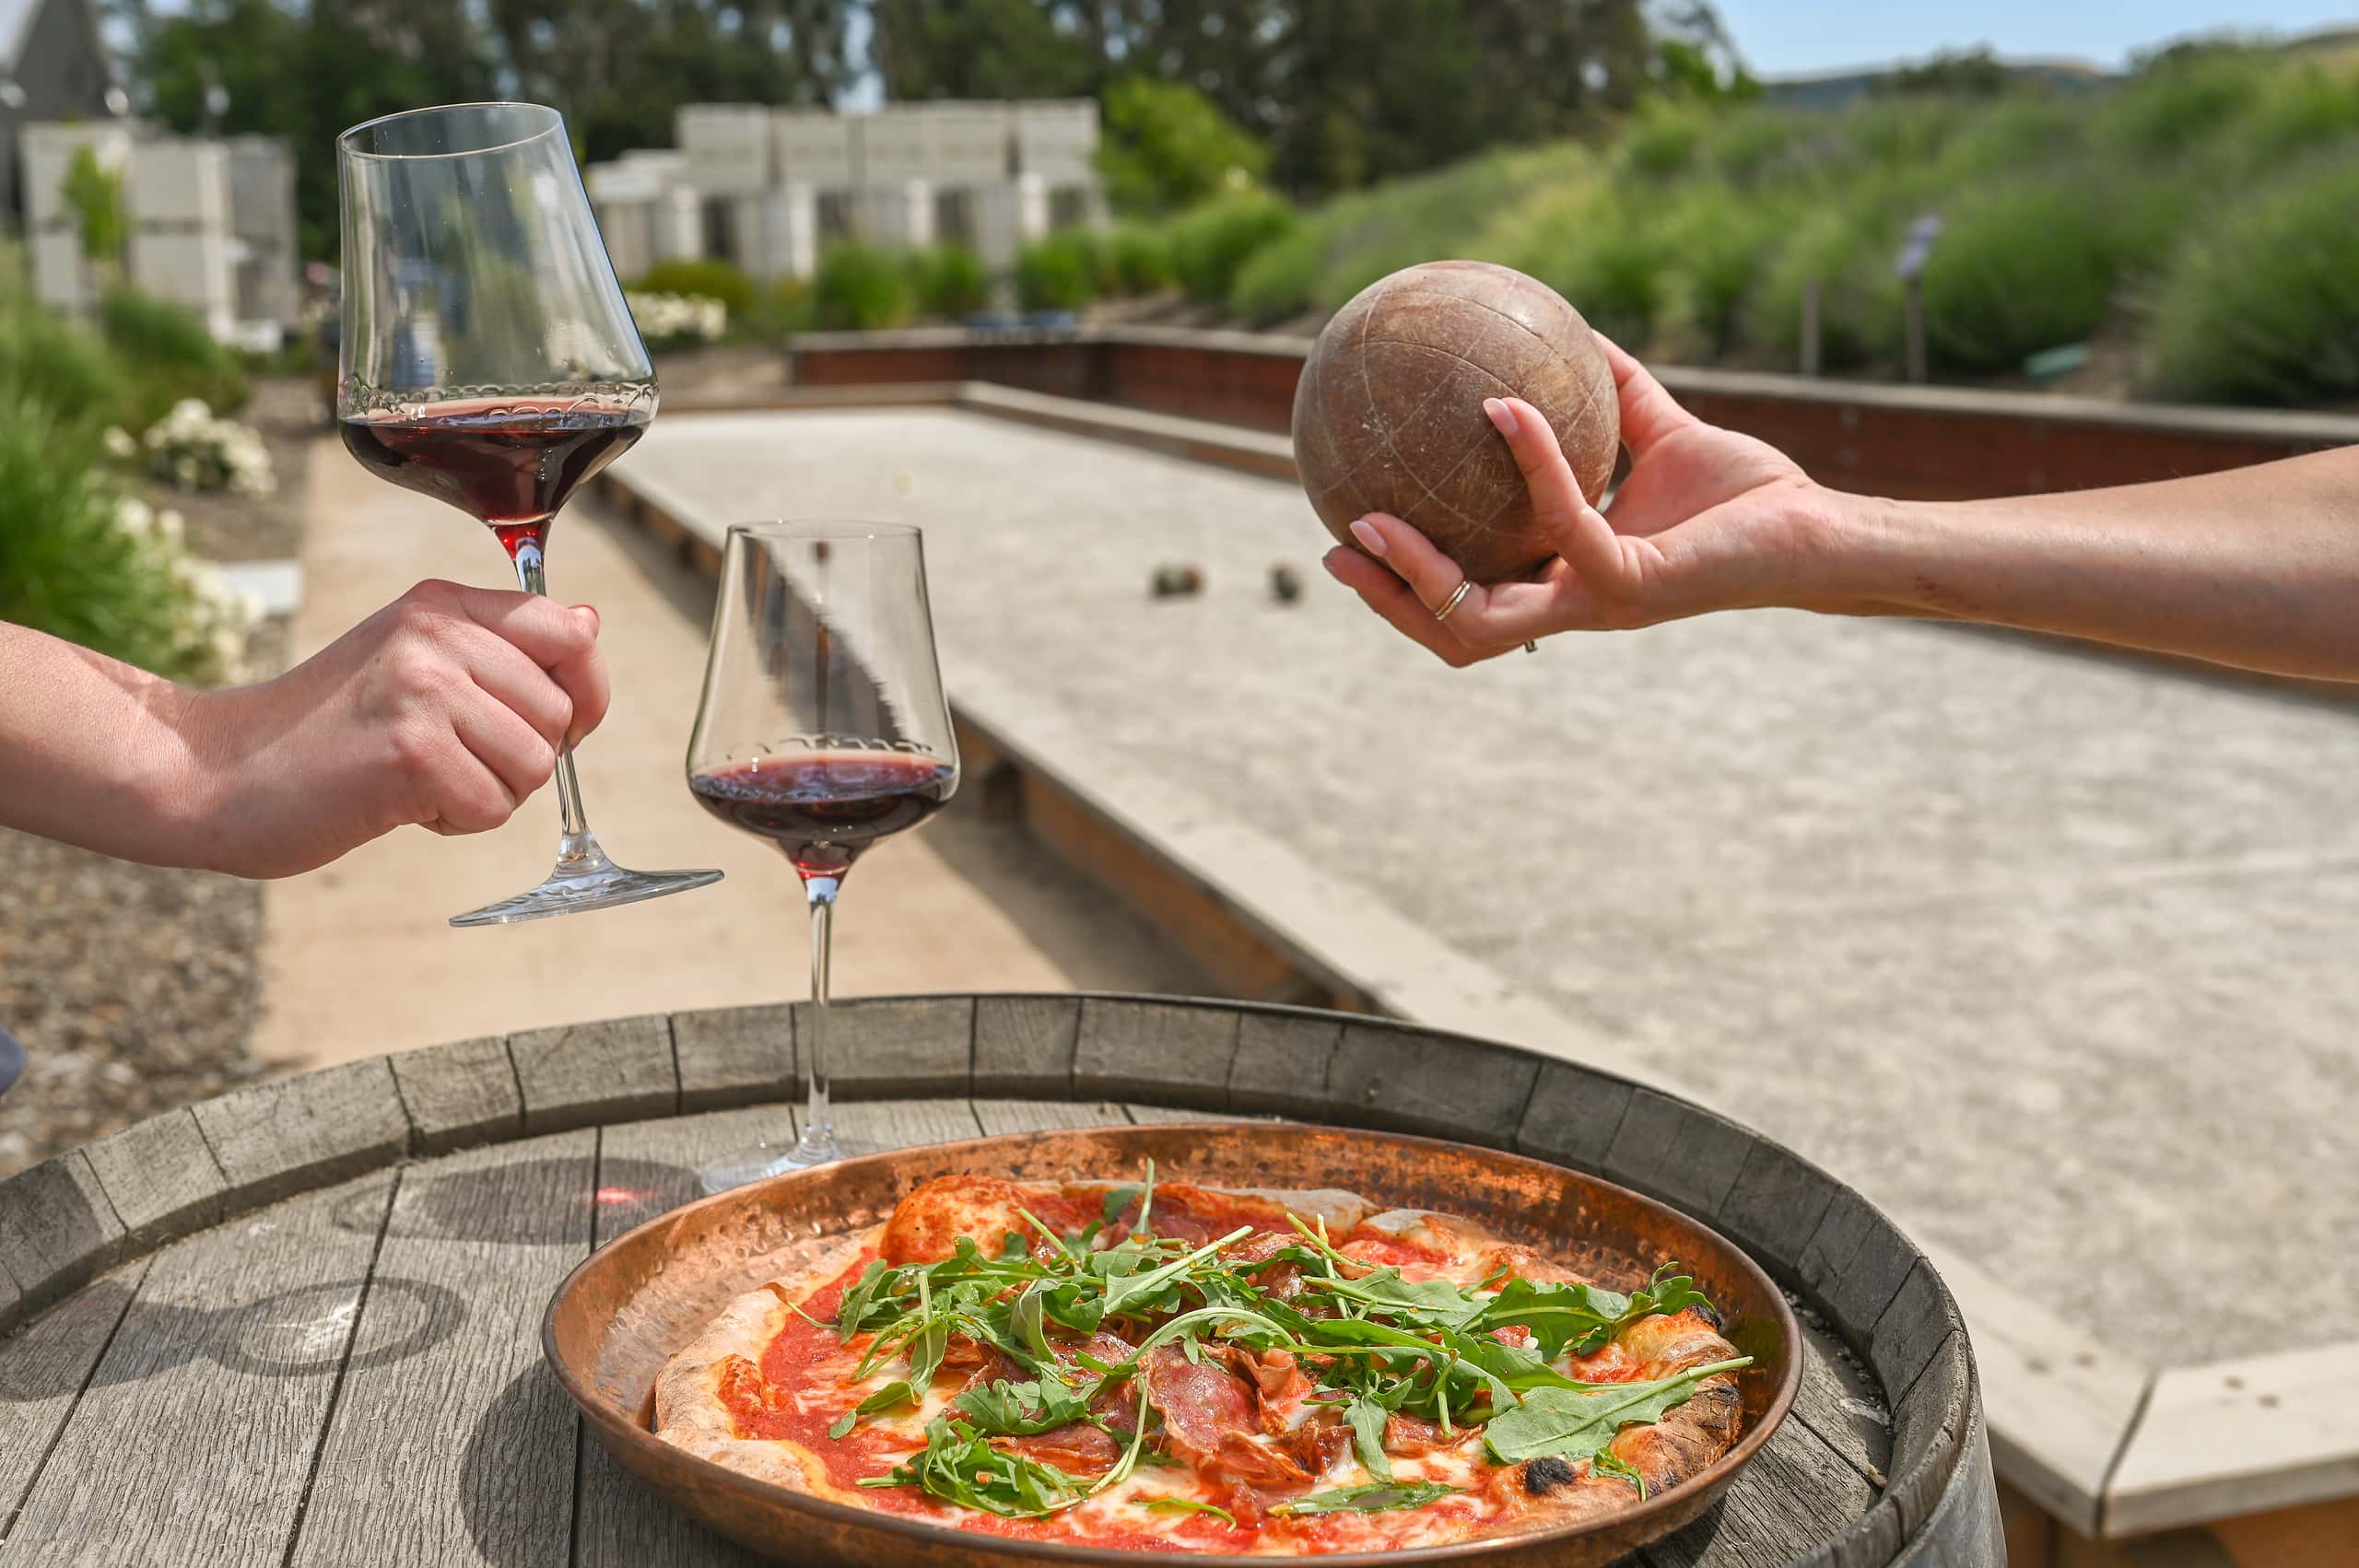 Woman holding bocce ball, man holding glass of red wine, set over an over fired pizza in front of Bocce area.